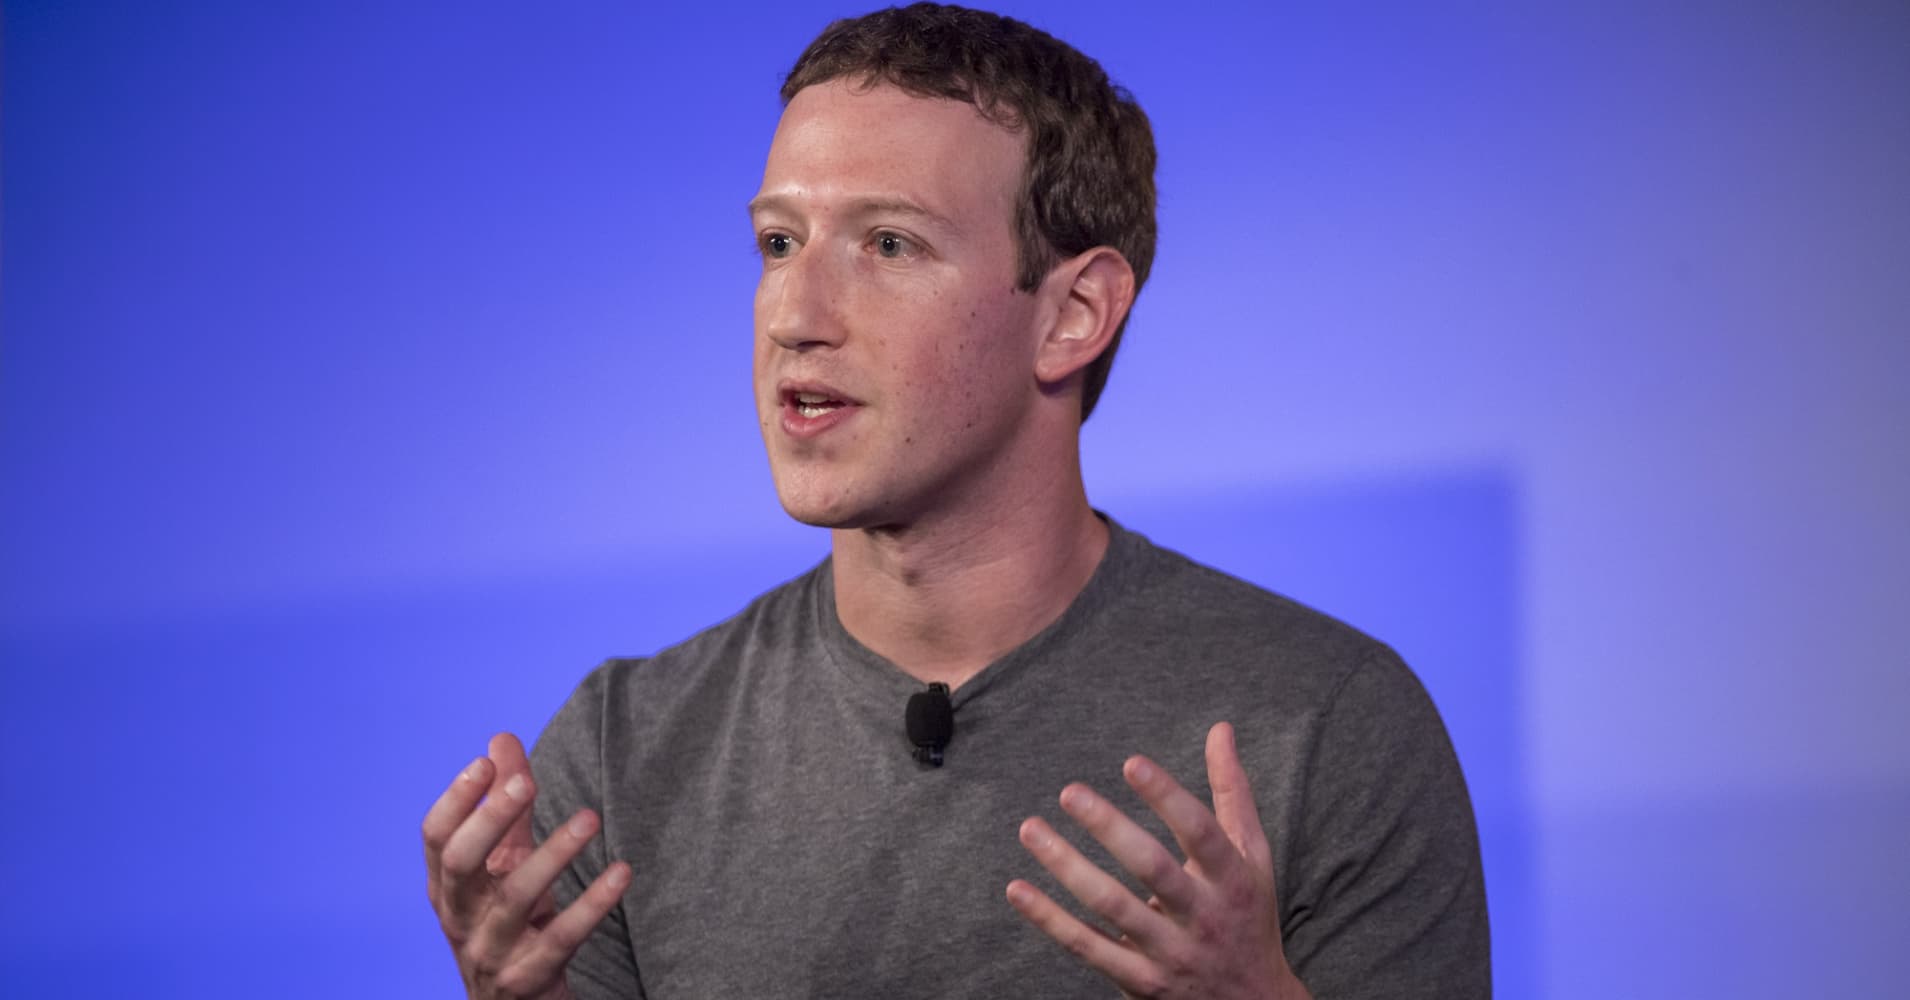 Facebook is polling some users about whether it's 'good for the world'